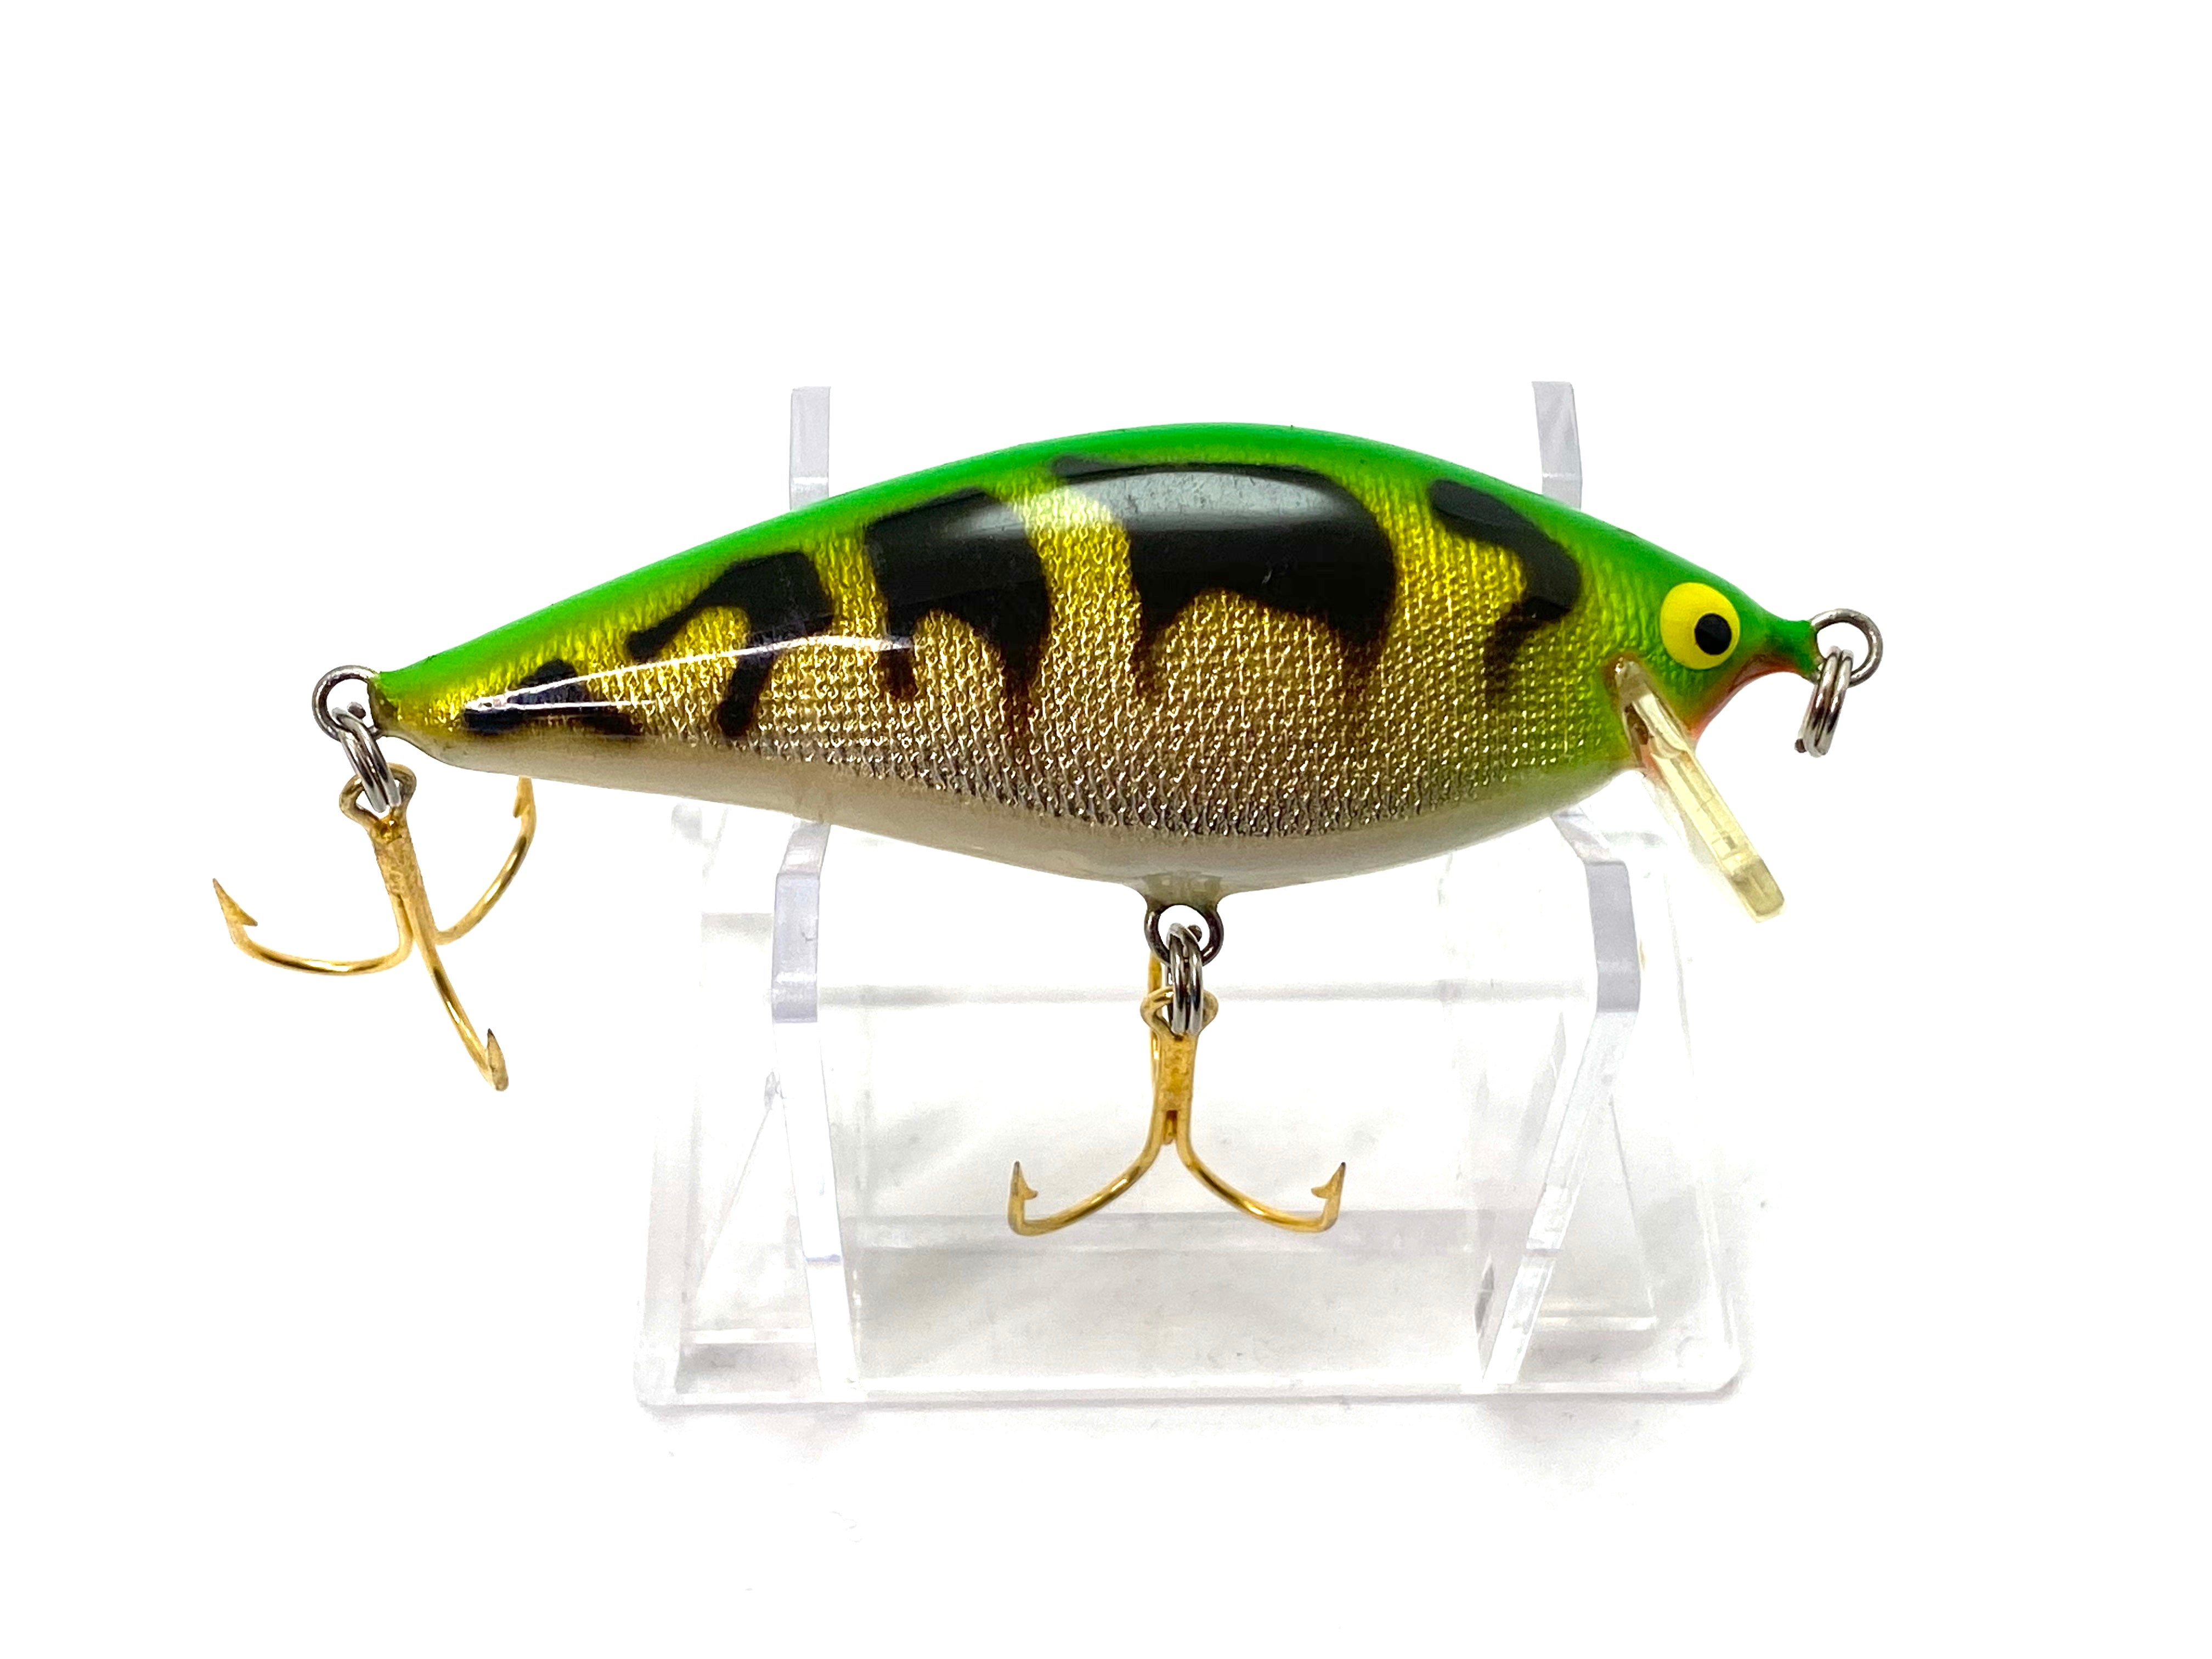 4inch 29g Jointed Sunfish Lures Bait Crank Bait Fishing Tackle Bait Carbon  Fiber Bill Customzied Wake Gill Bait